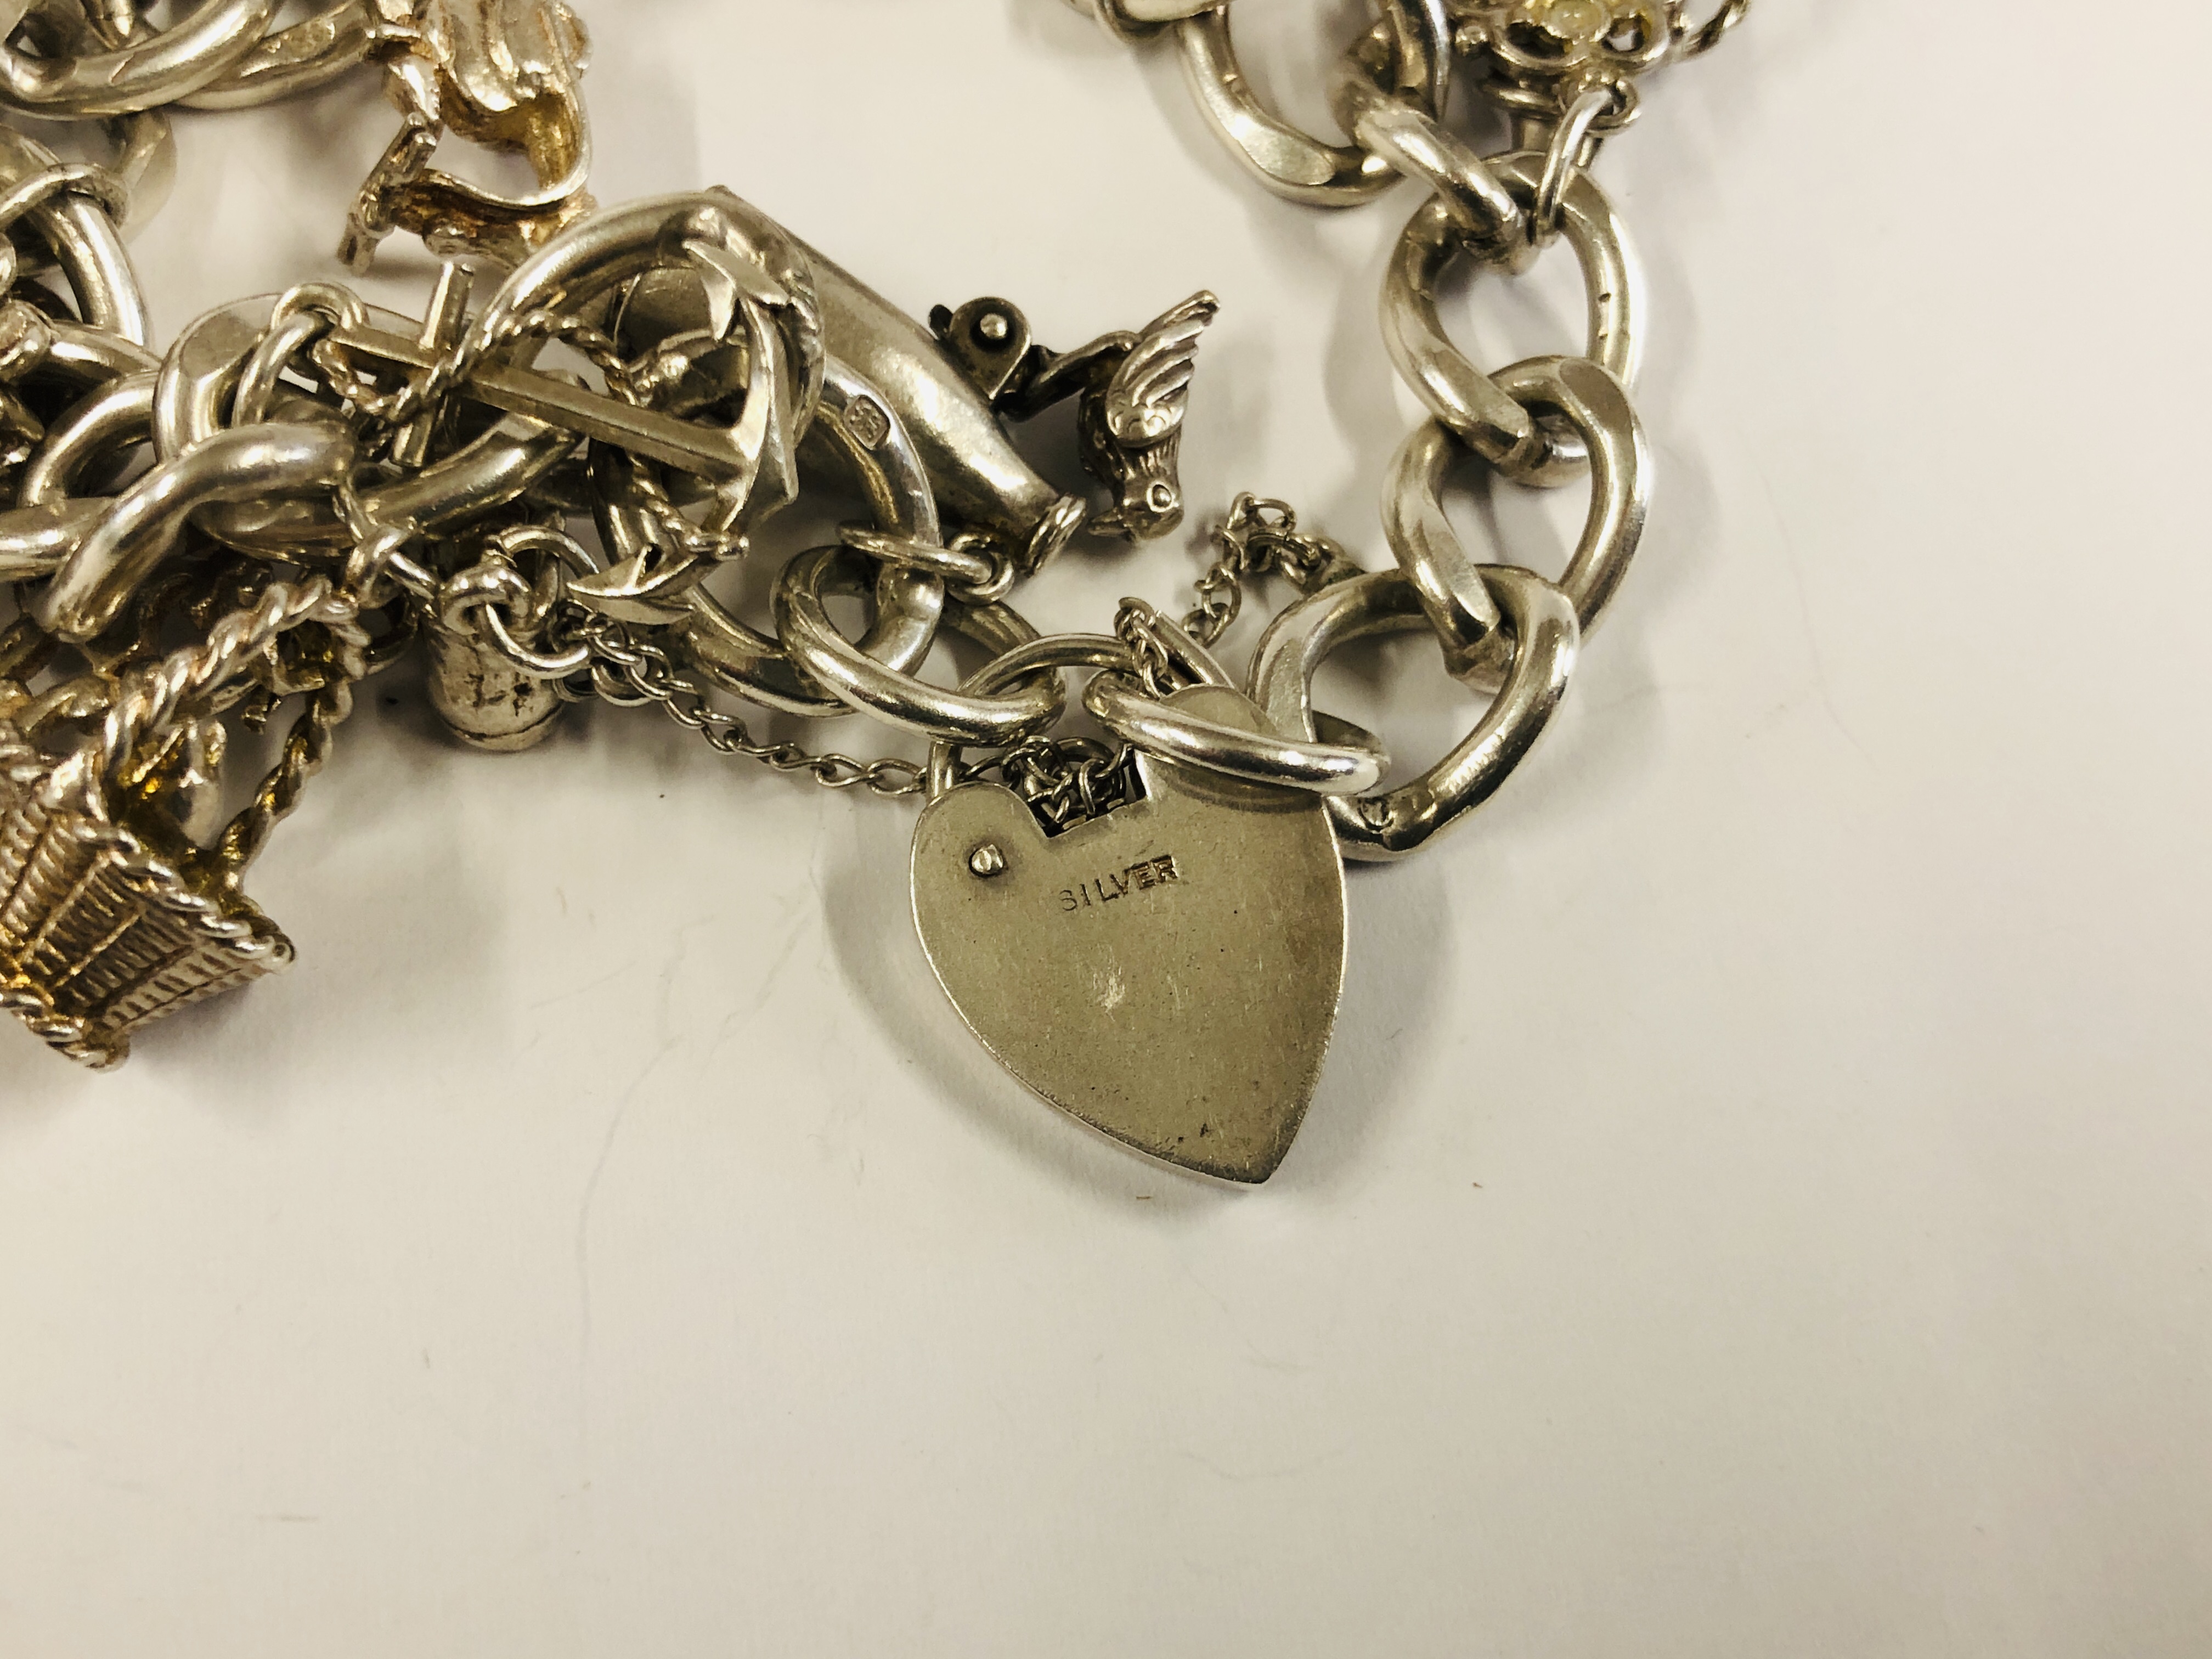 SILVER CHARM BRACELET WITH 13 CHARMS ATTACHED. - Image 2 of 6